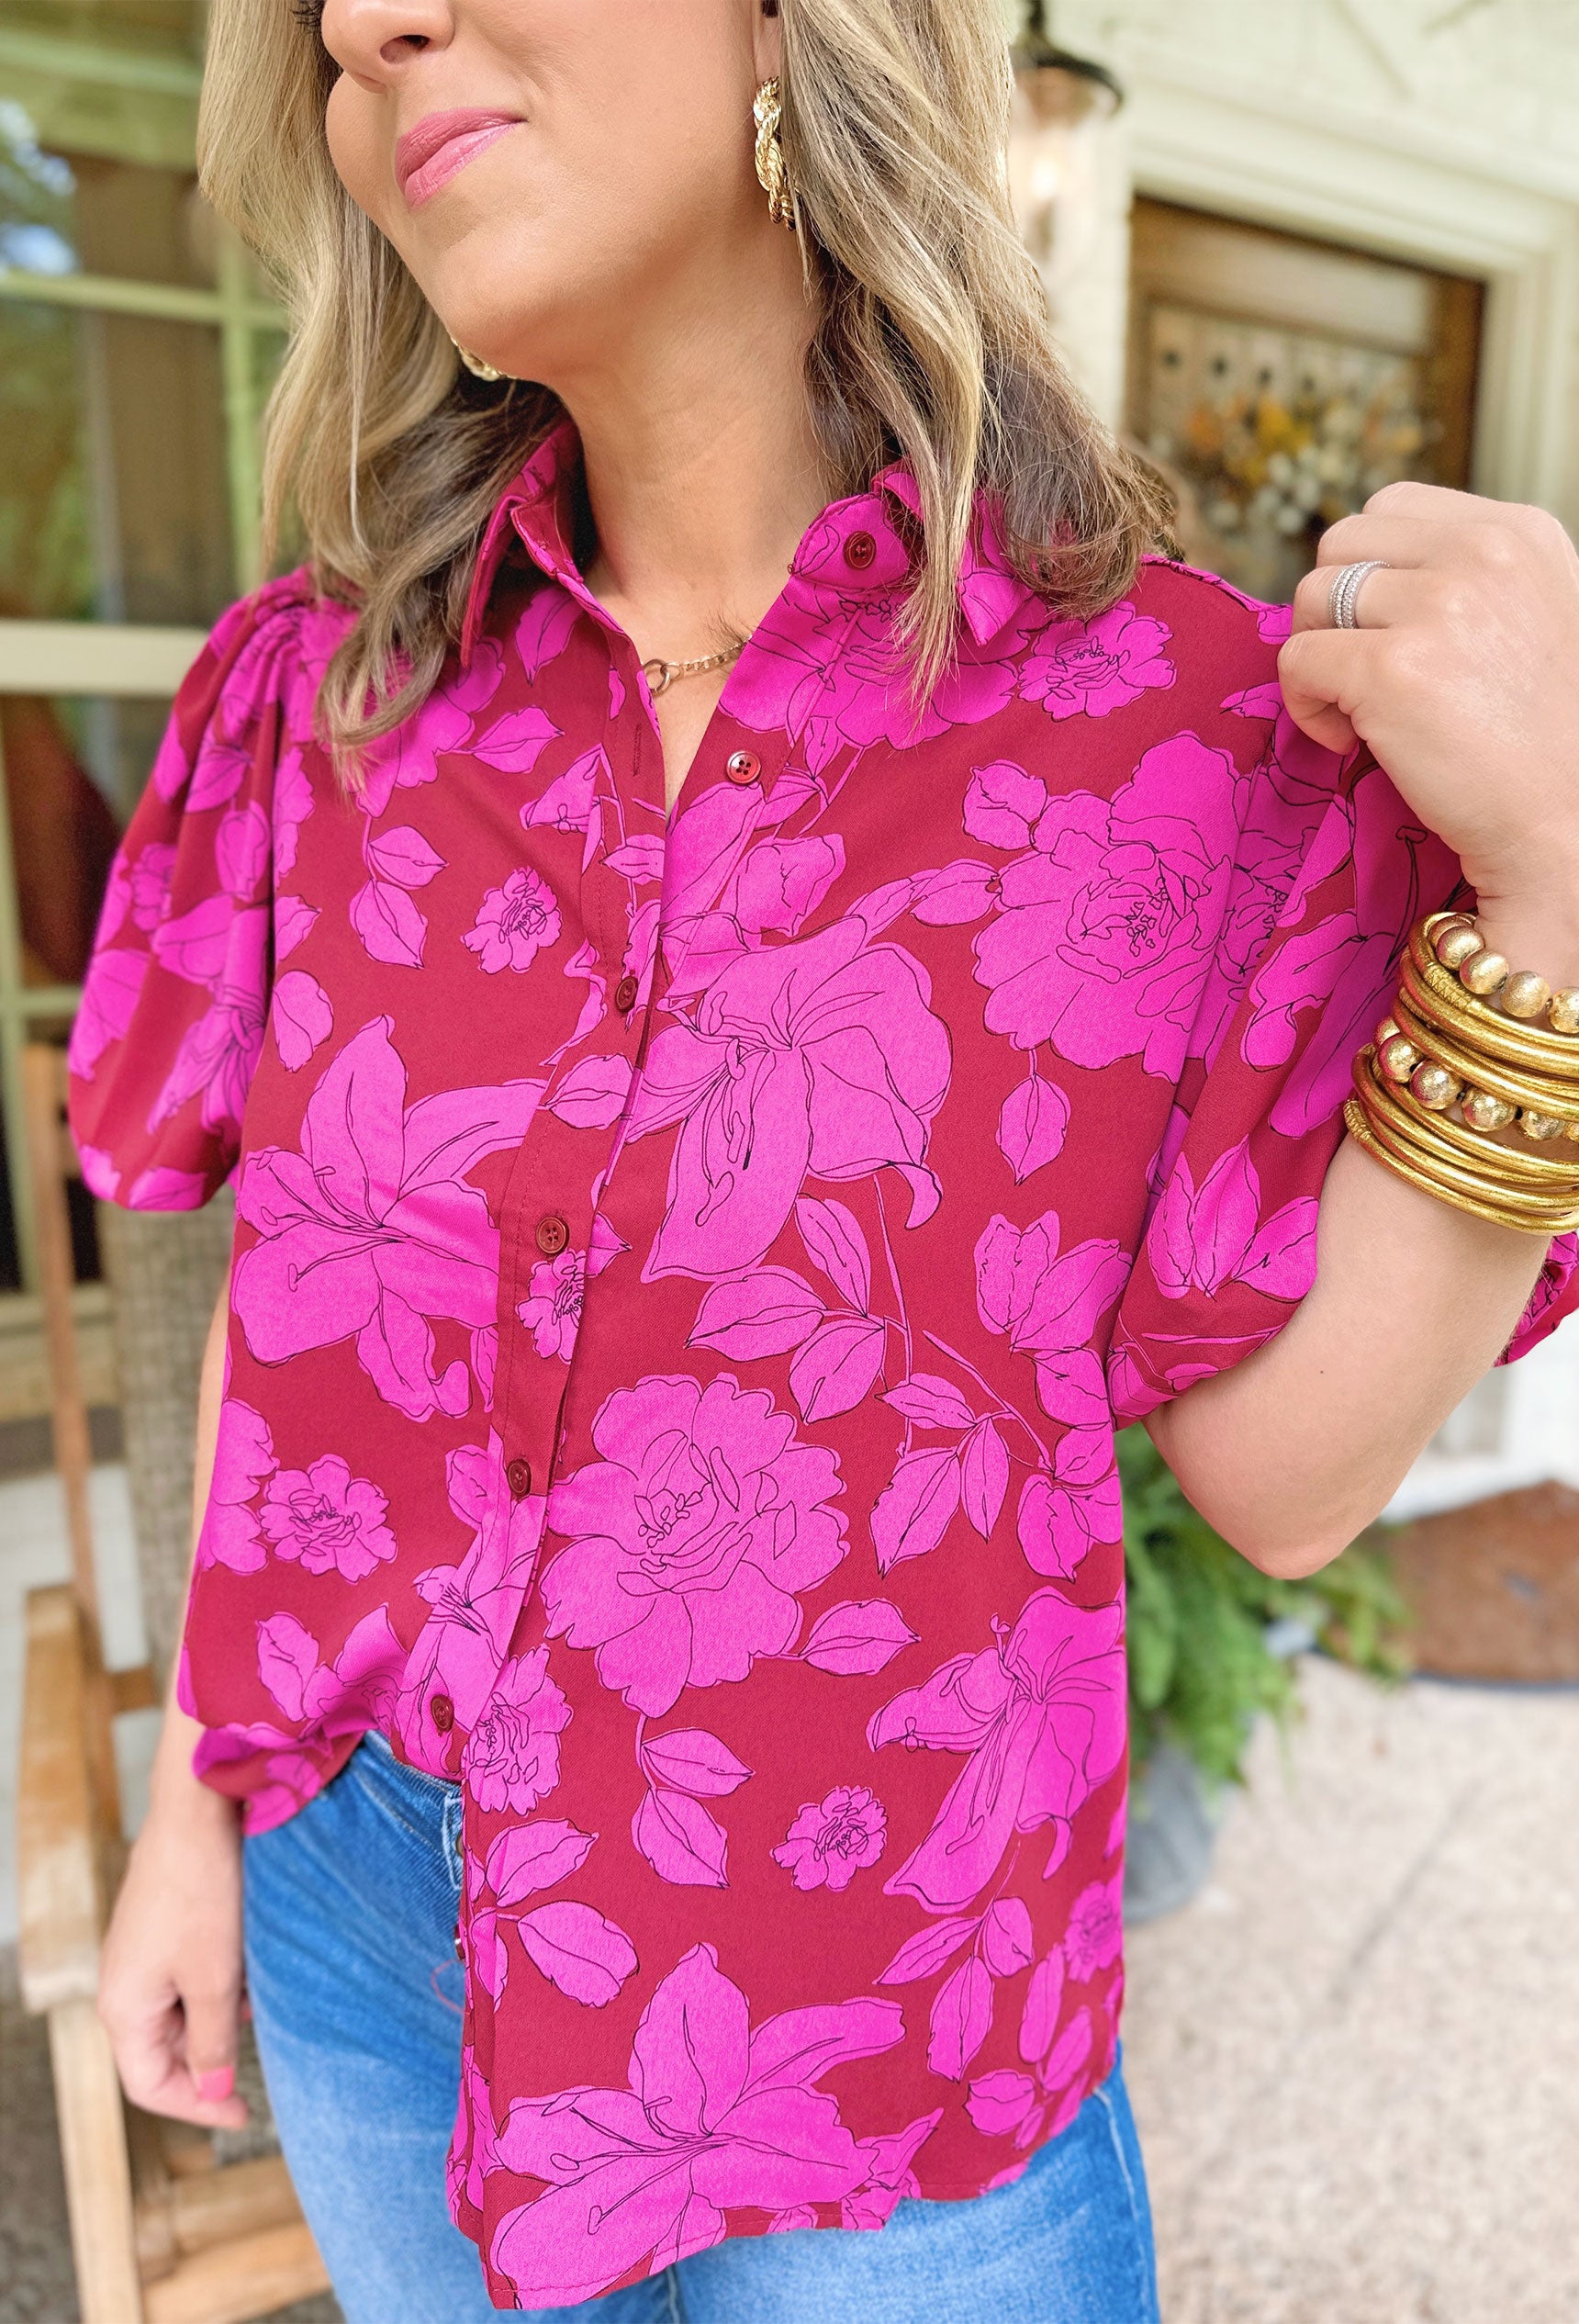 Send My Love Floral Blouse, Short sleeve button up floral blouse with a slight puff in the sleeve